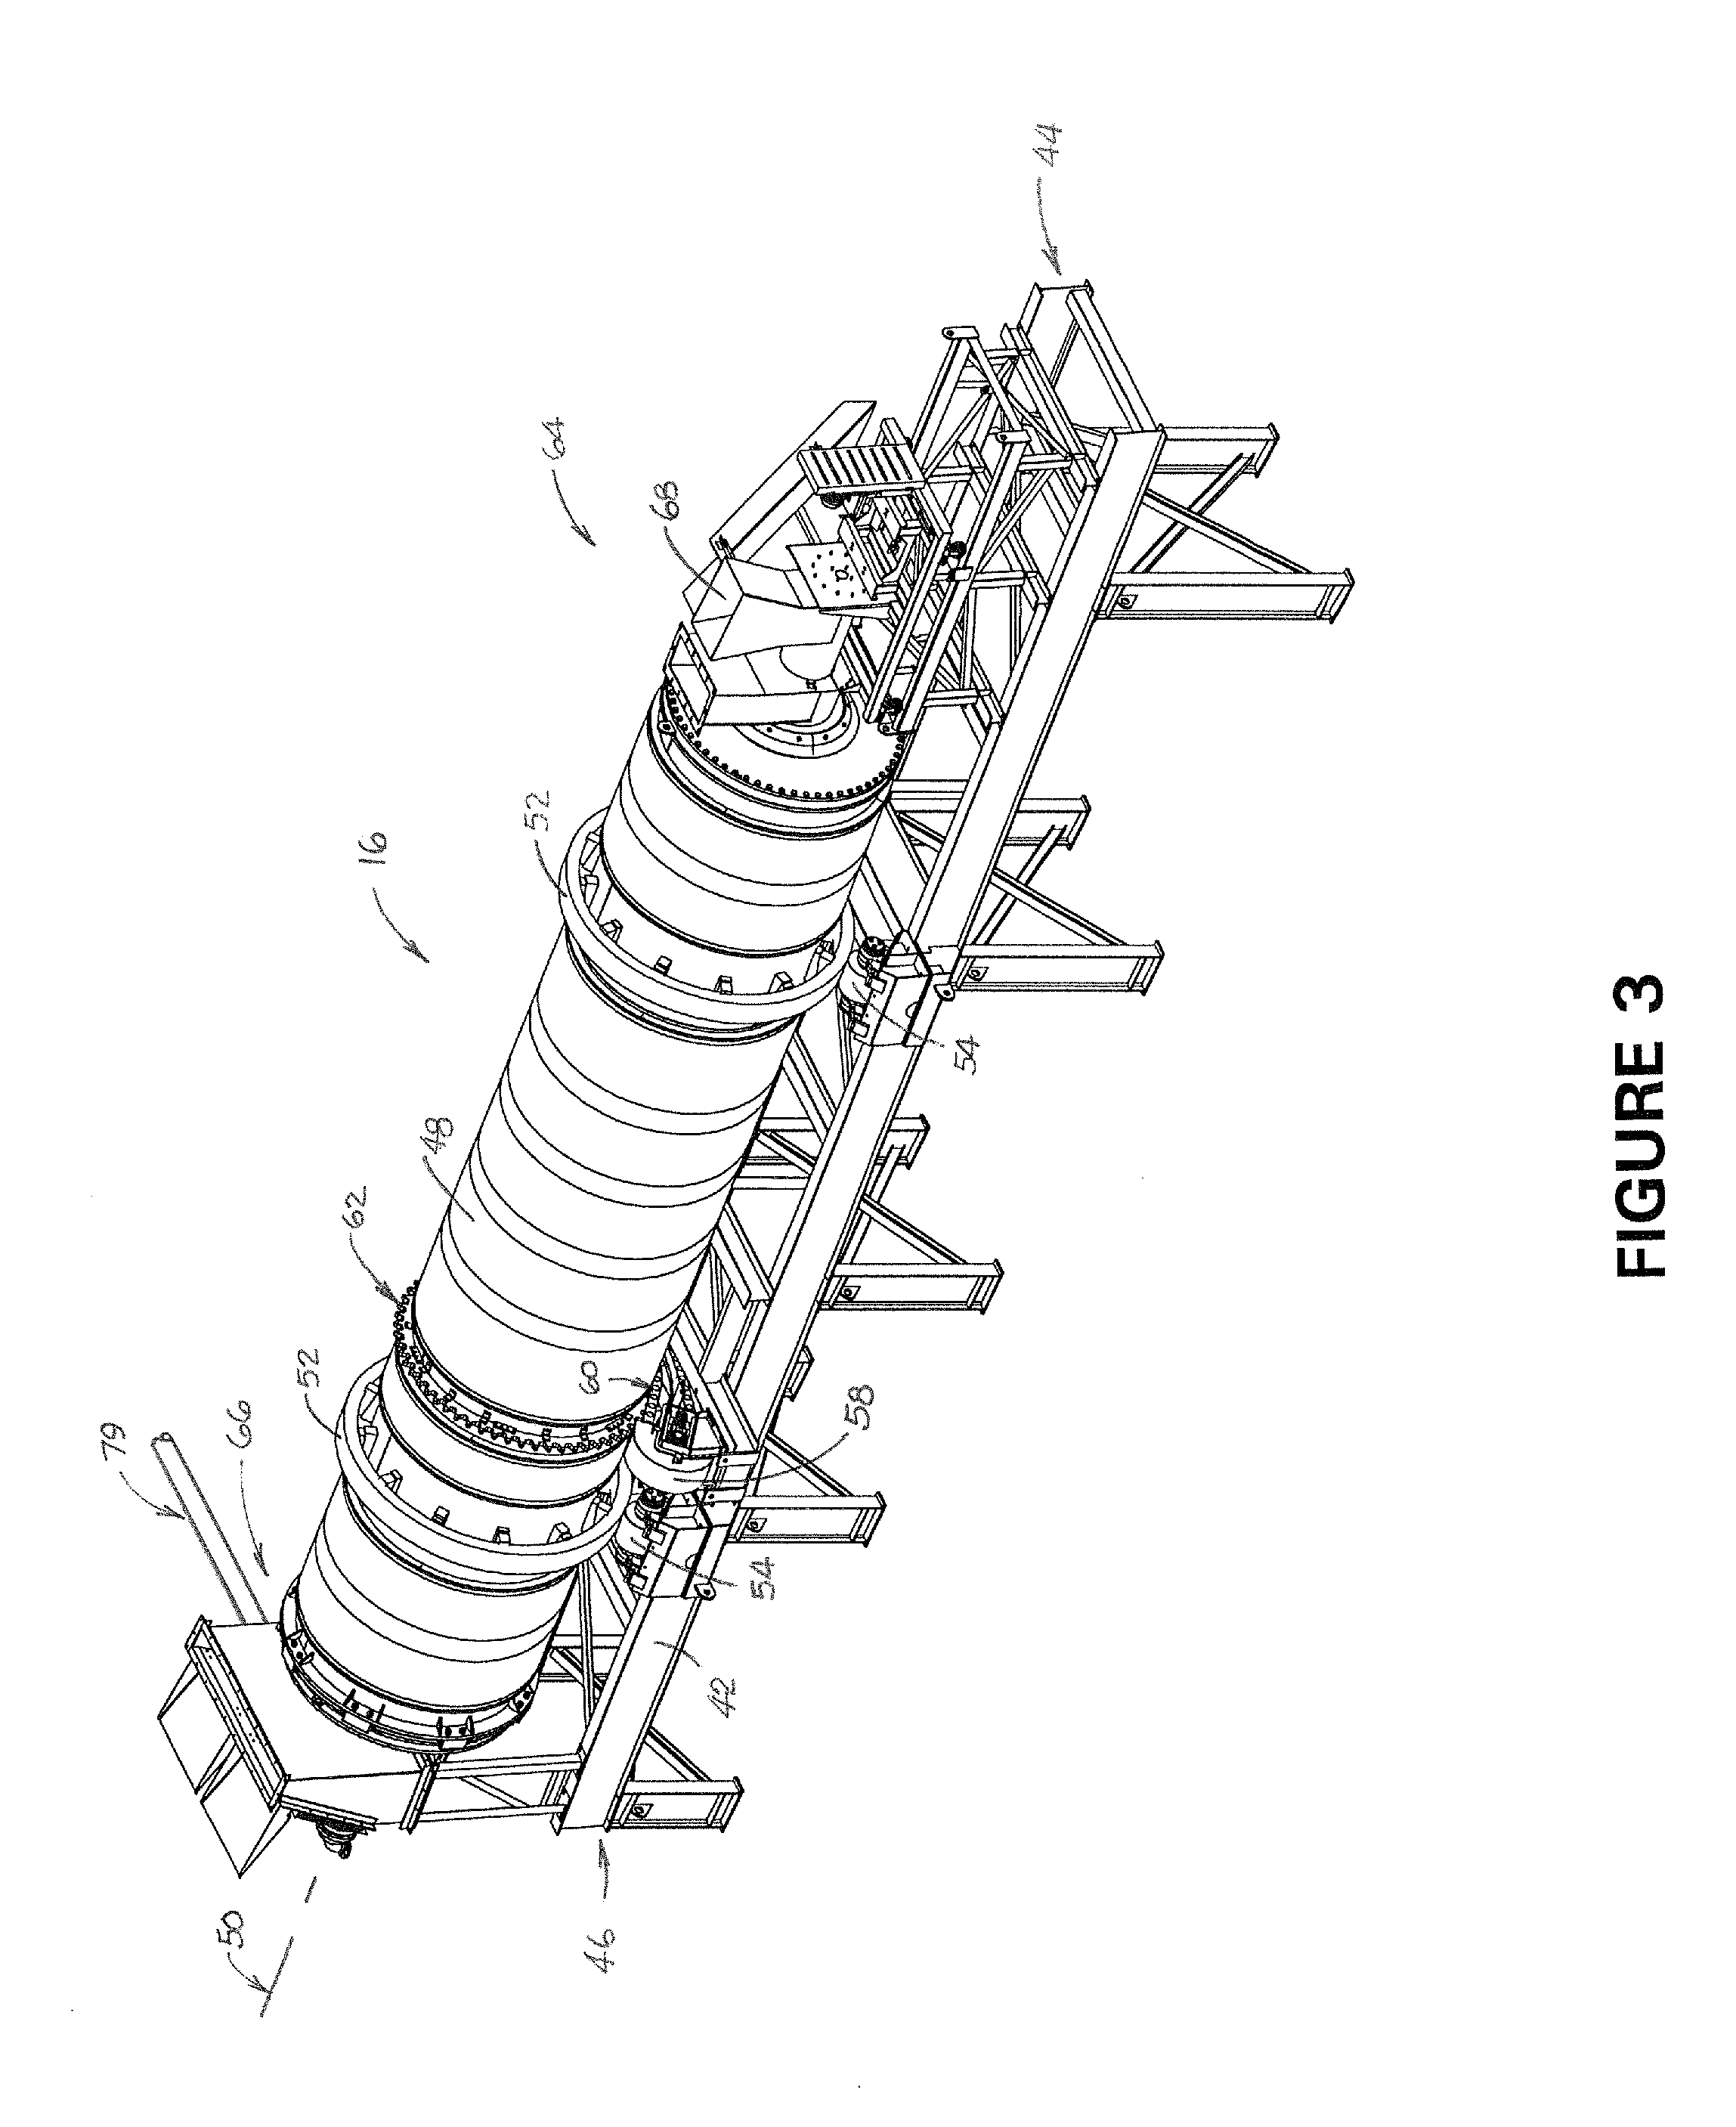 Method And Apparatus For Pelletizing Blends Of Biomass Materials For Use As Fuel